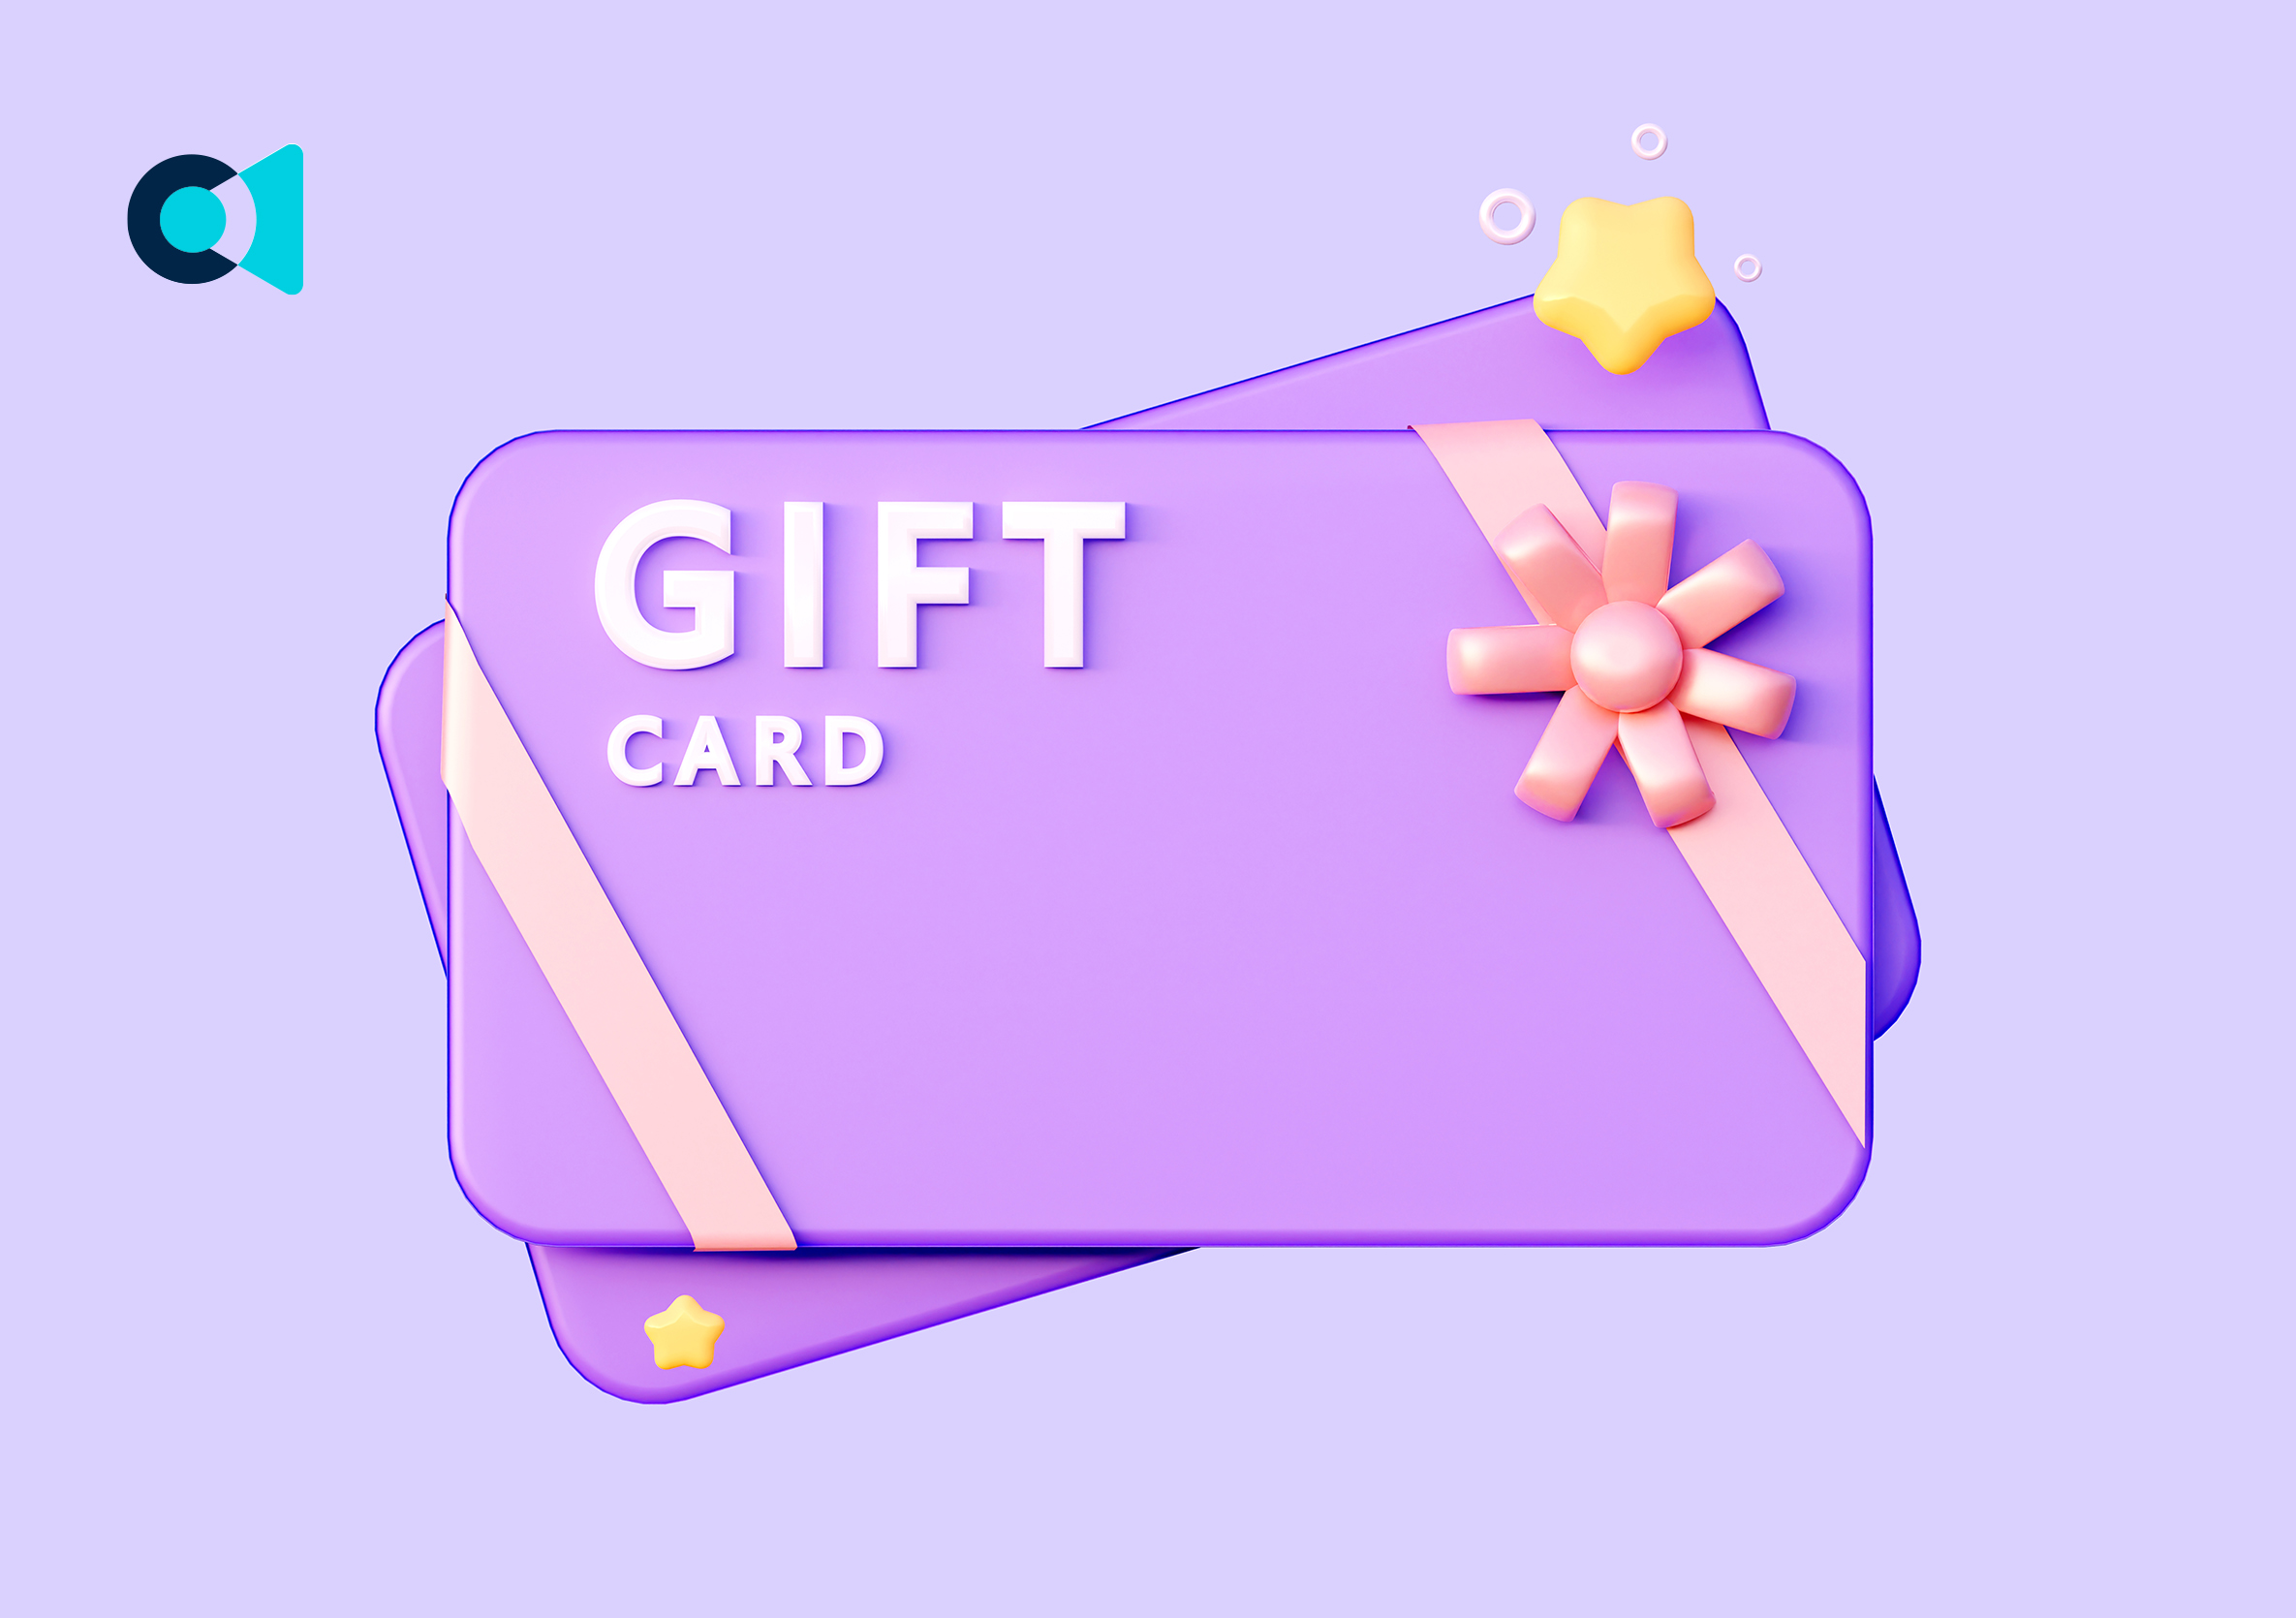 How to choose the perfect gift card for any occasion